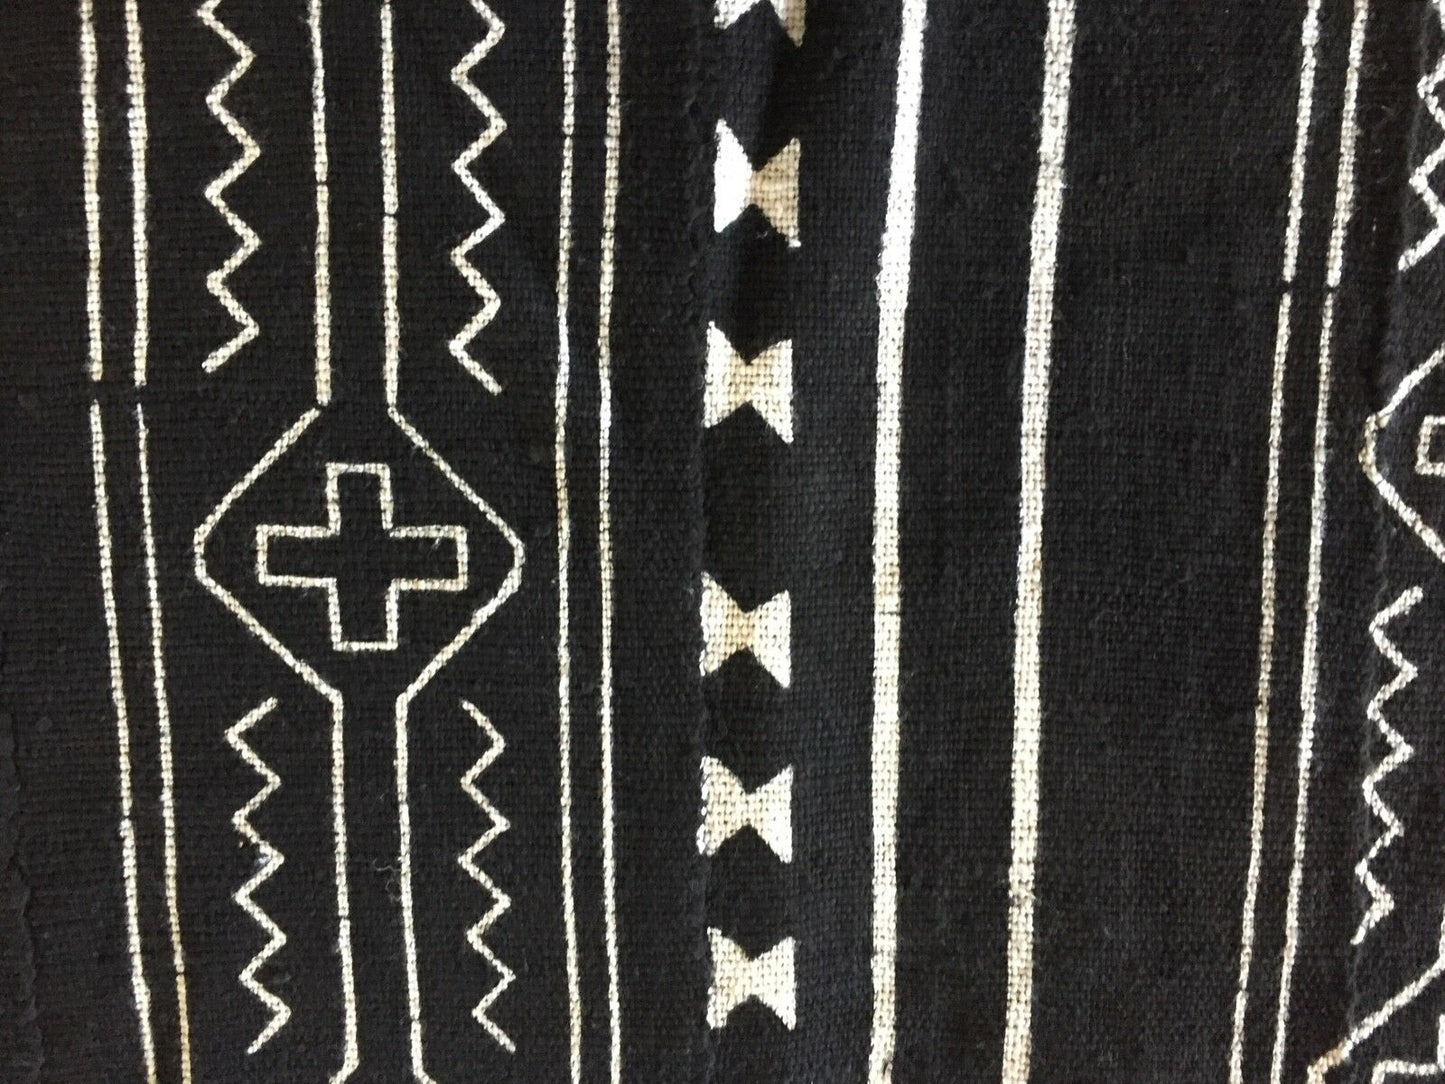 African Mali Black and White Mud Cloth Textile / PAIR 64" by 45.5" Pair # 1839